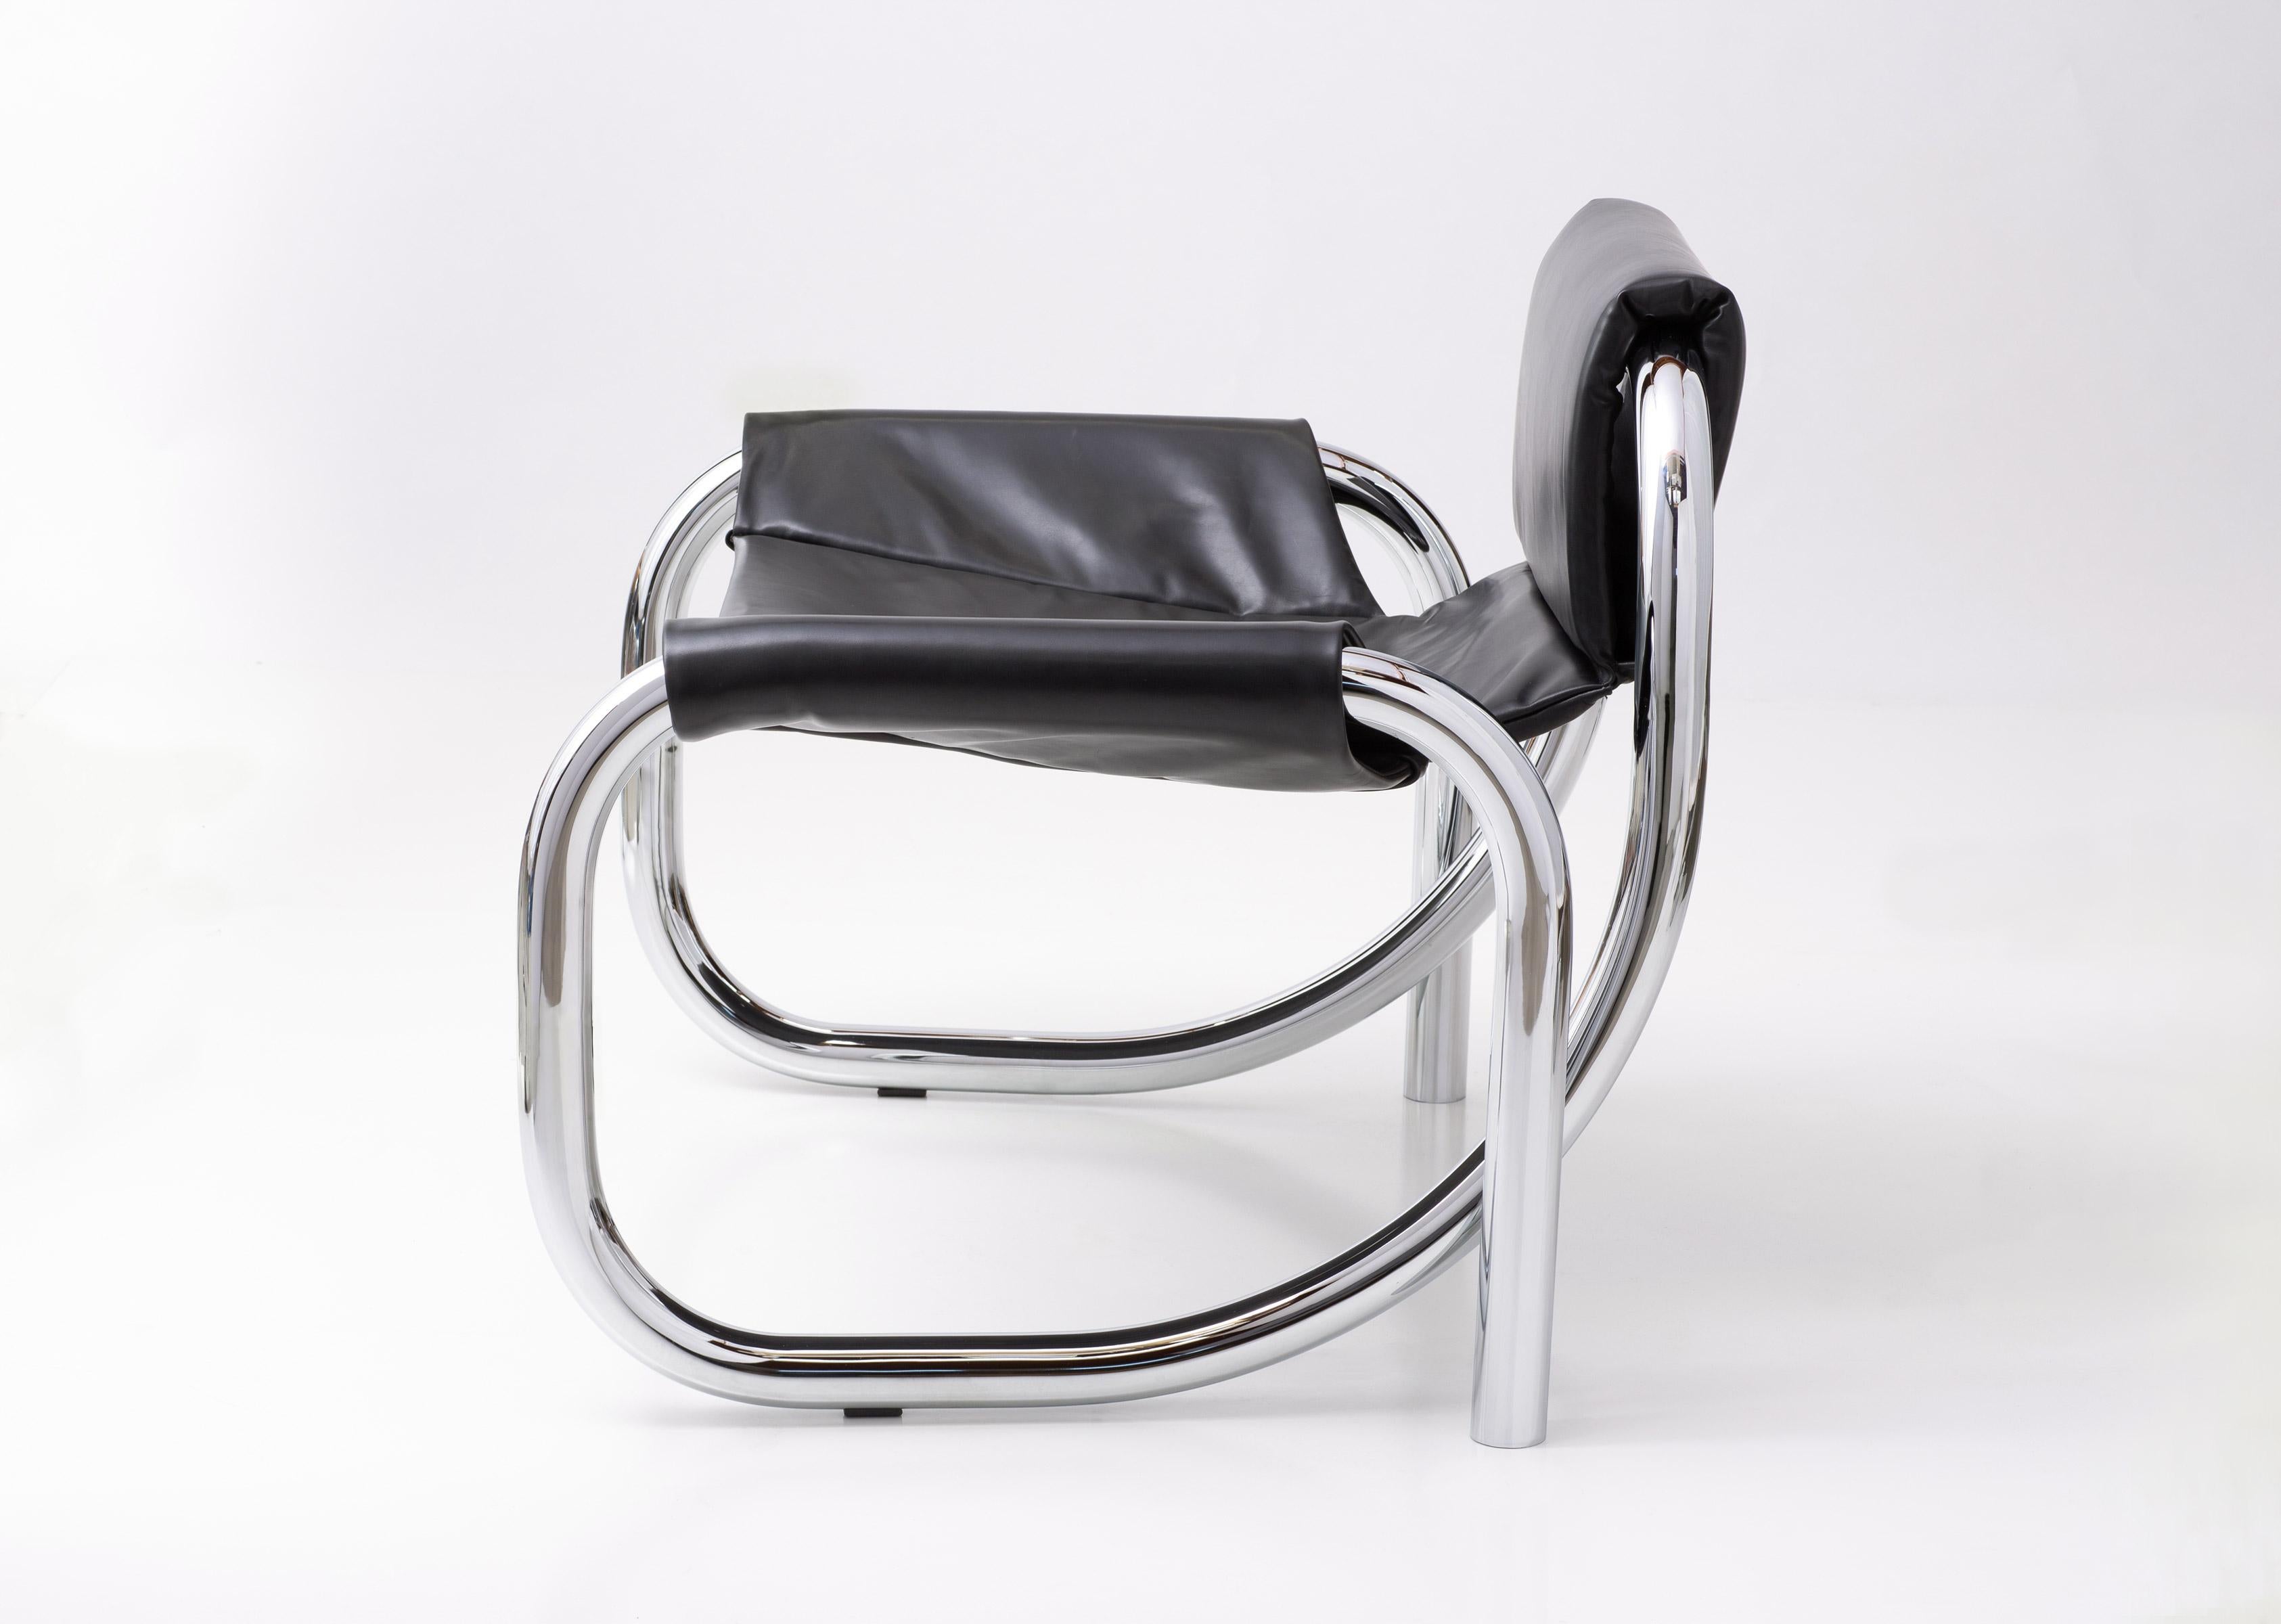 The Coda lounge chair is a study of Material, form and emotion. The contrast of the cushioned leather sling and the continuous polished chrome frame, evokes cinematic drama and 70s Art Deco revival. It is offered in polished chrome with responsibly